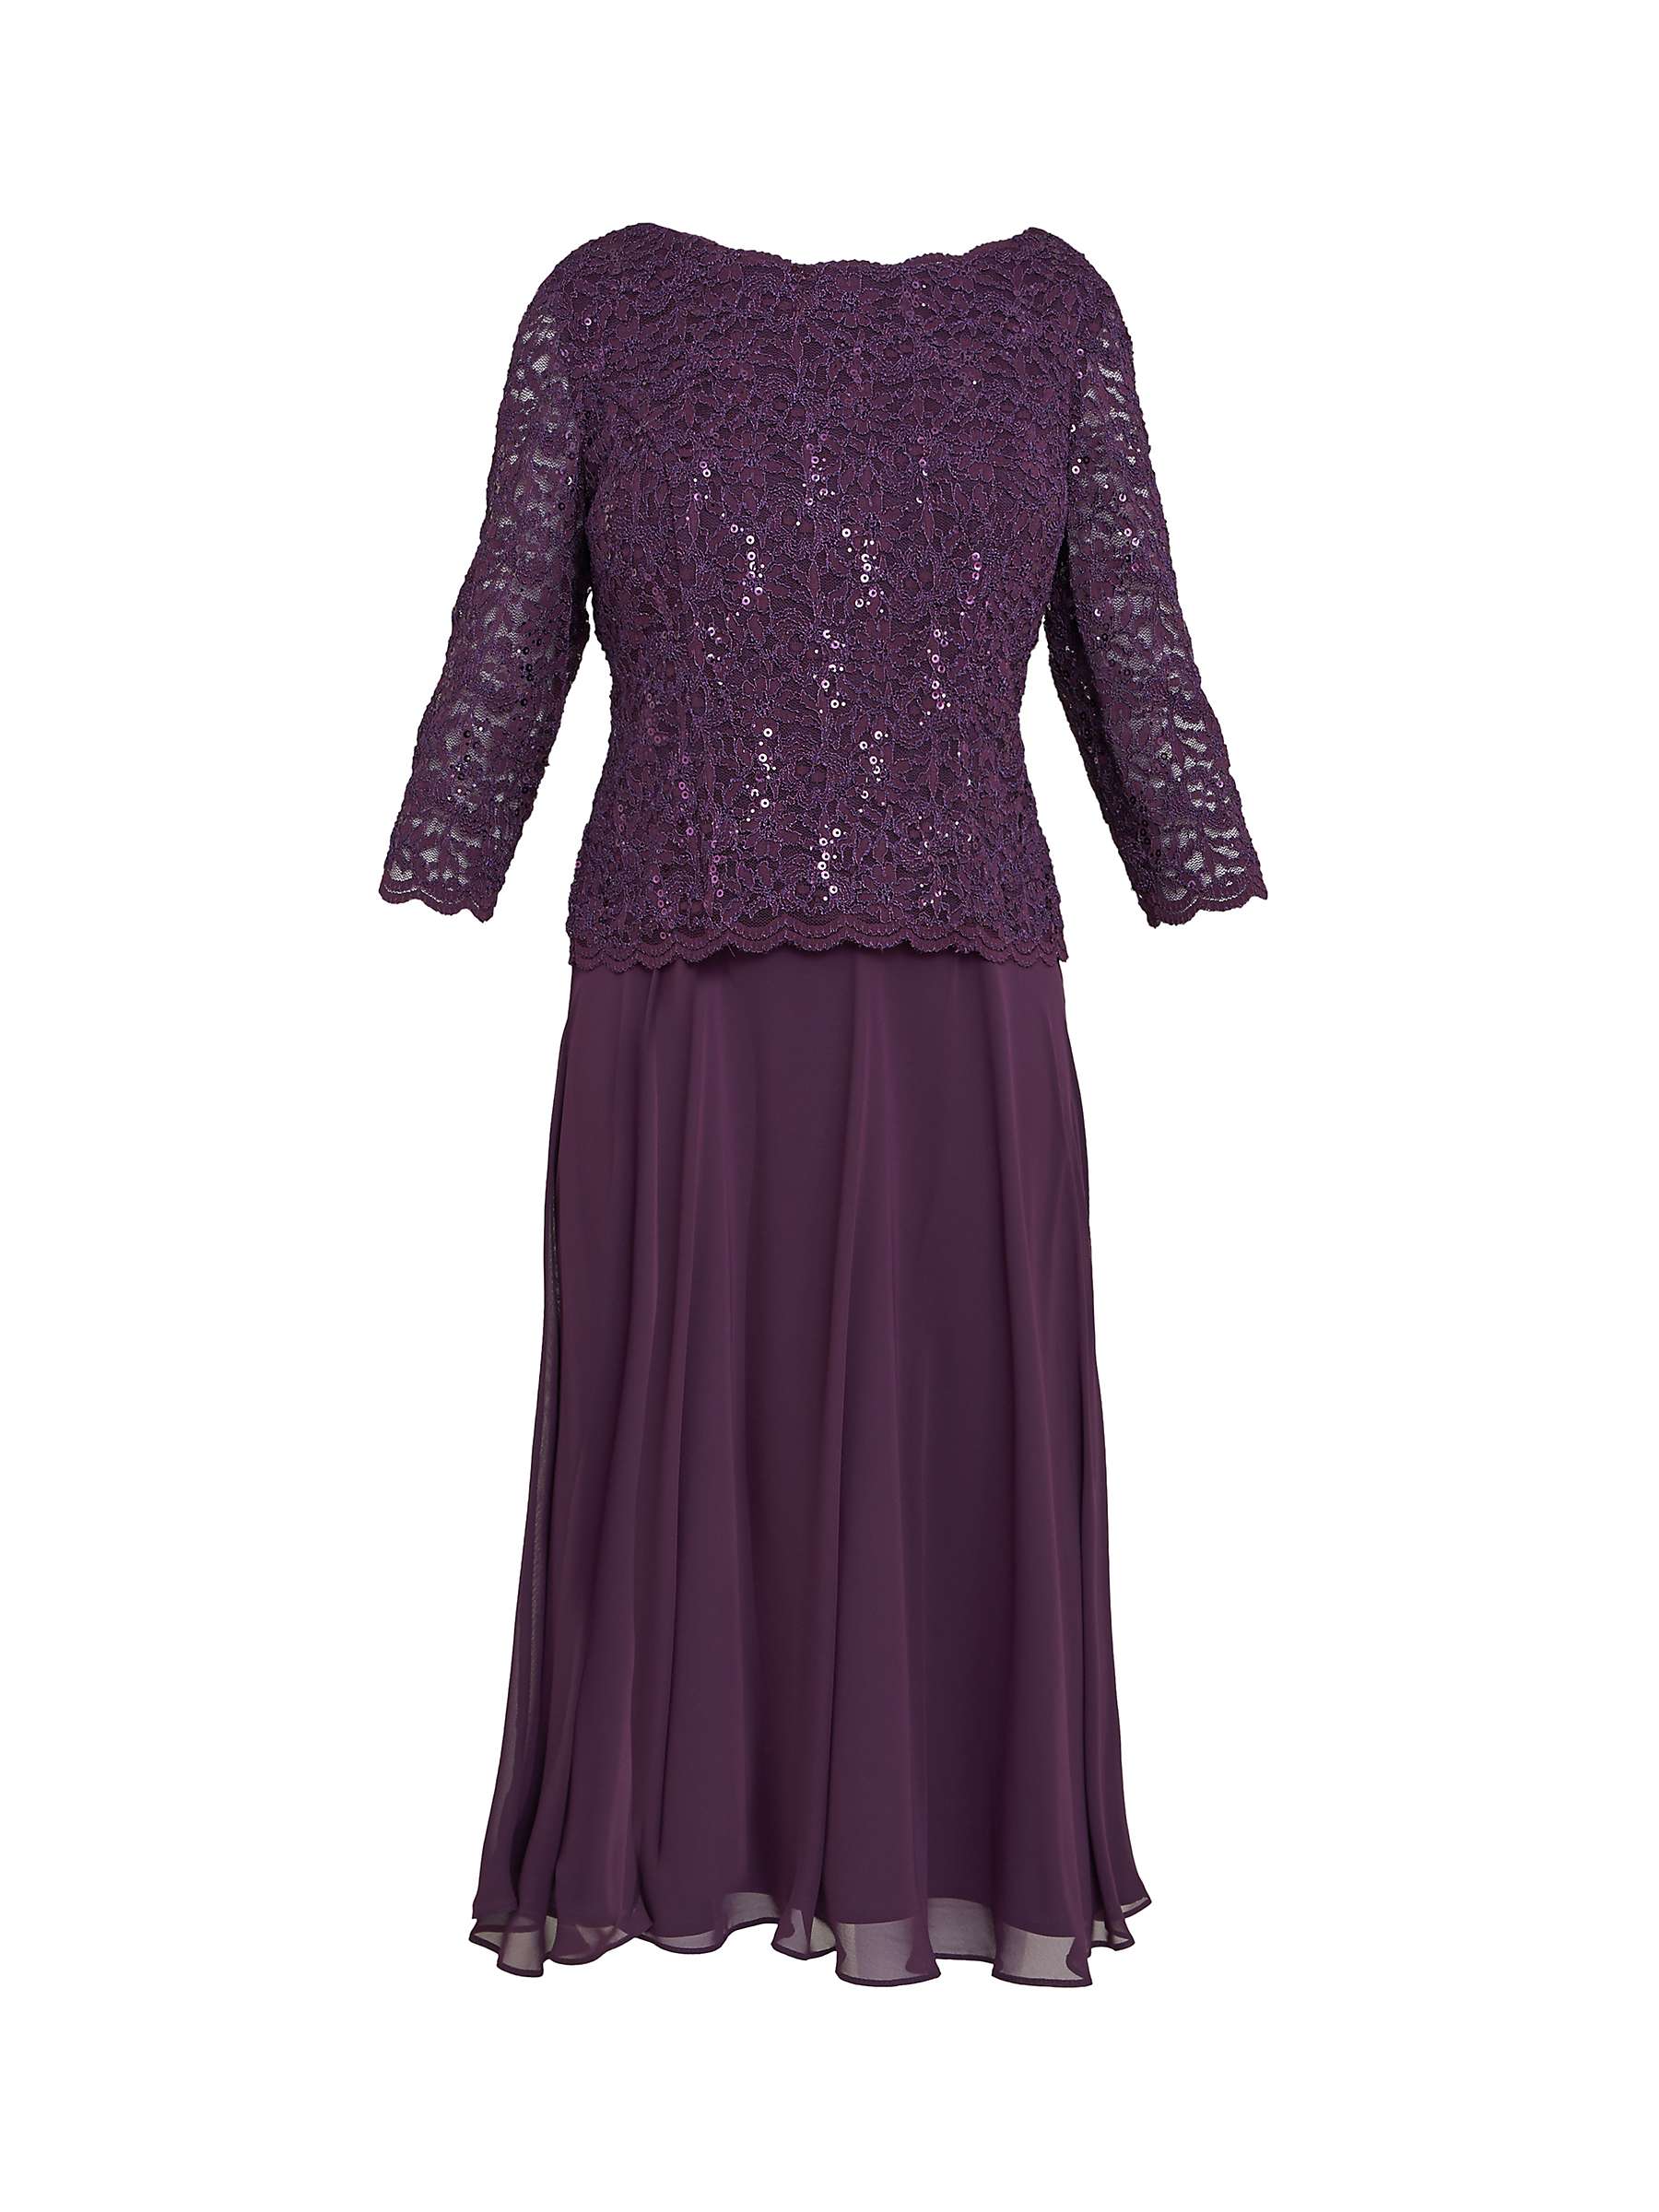 Buy Gina Bacconi Rona Floral Lace Bodice Midi Dress Online at johnlewis.com